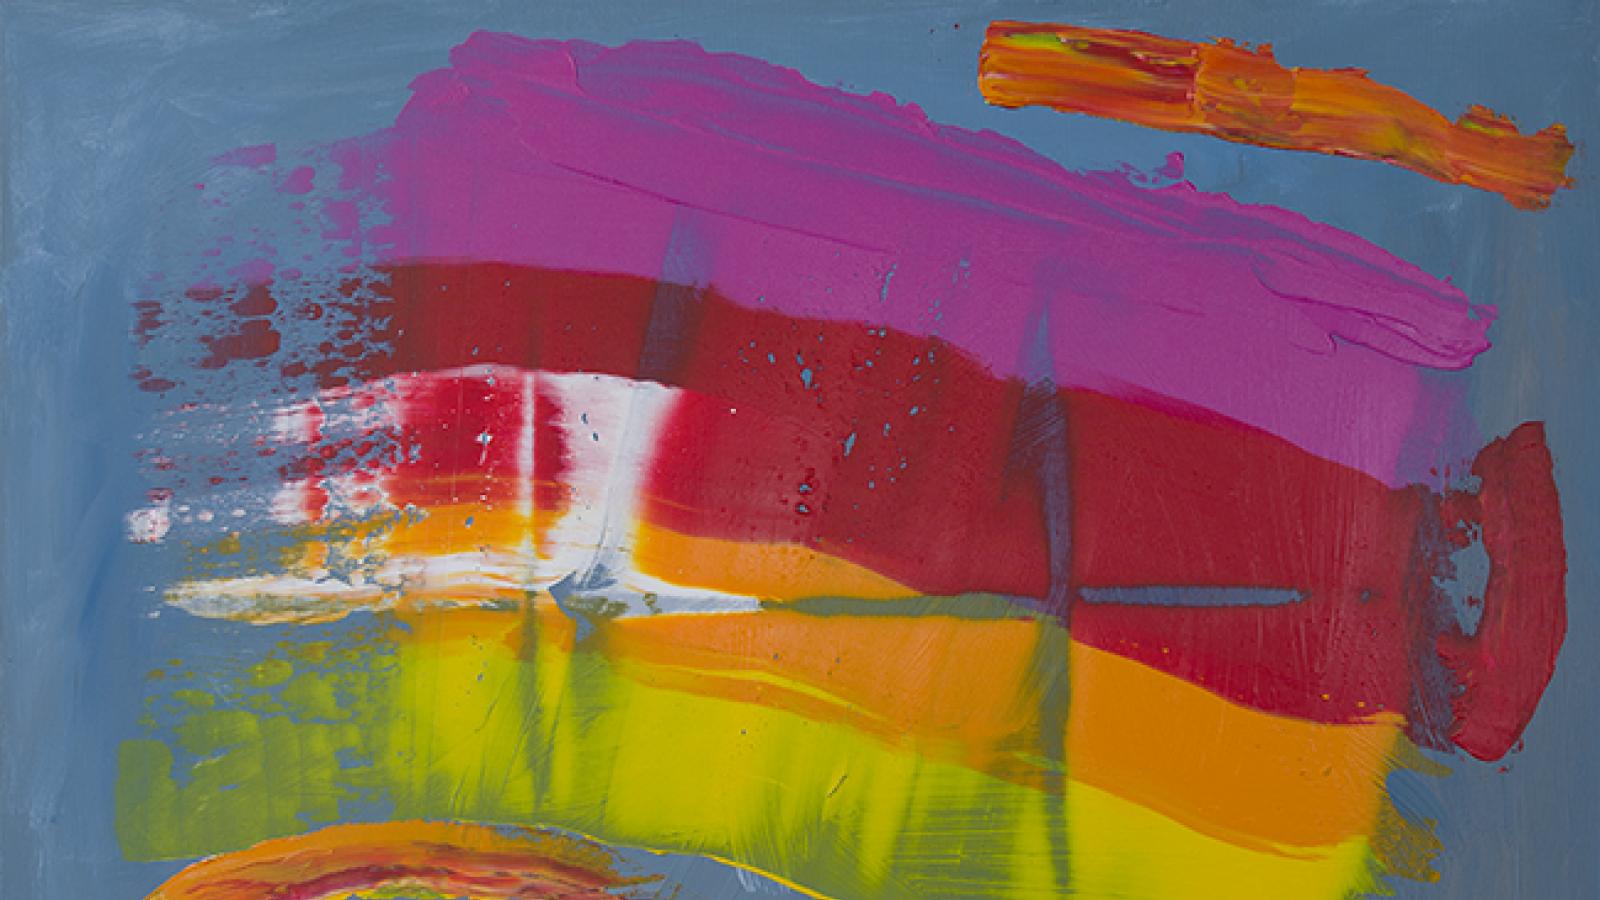 A bright abstract painting made with blue yellow orange red and magenta